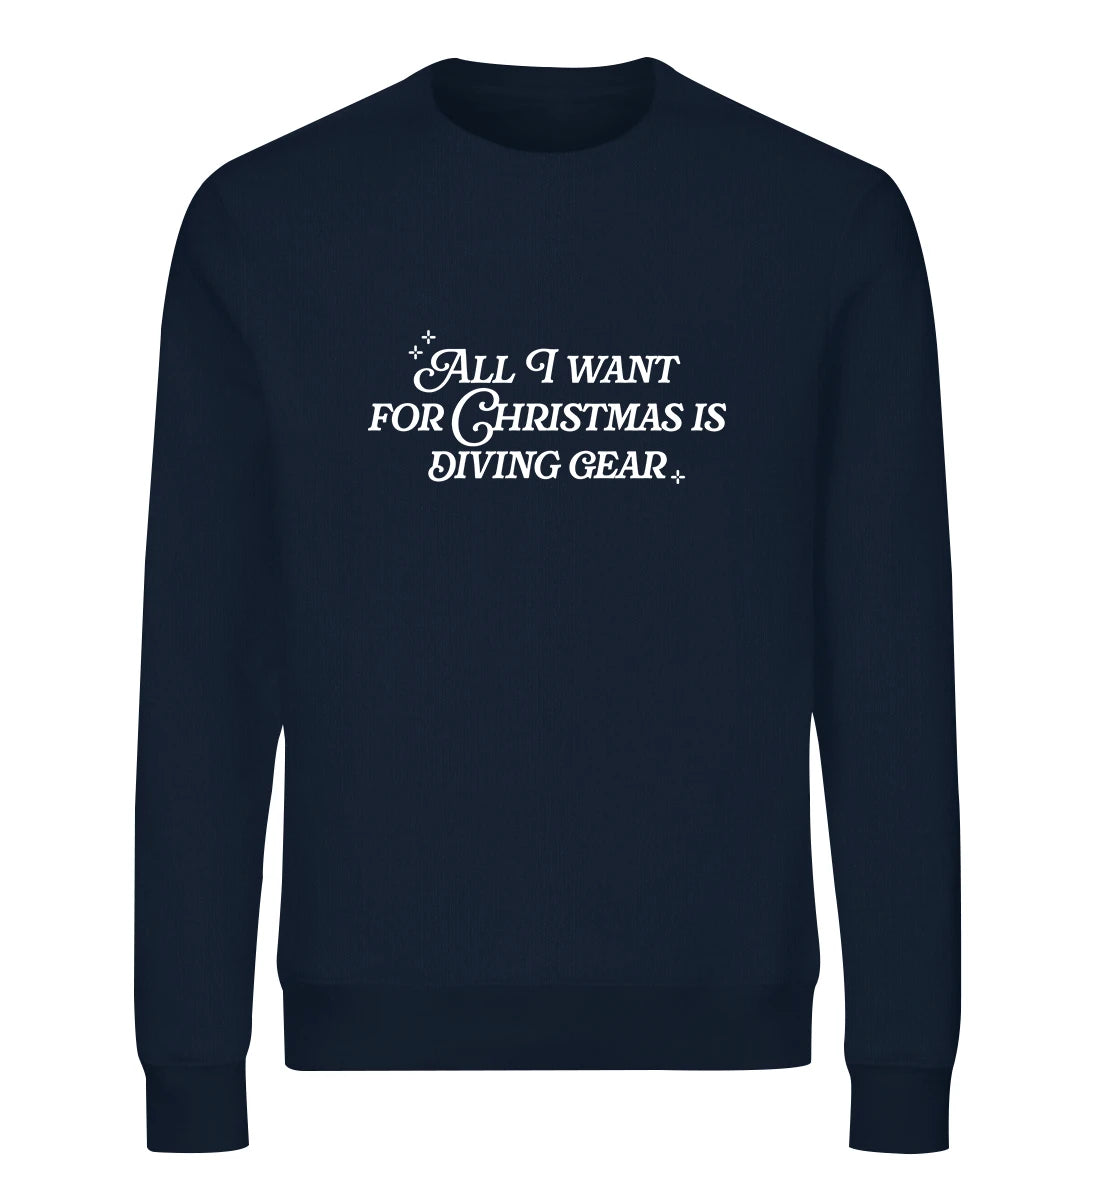 All I want for Christmas - Bio Sweater